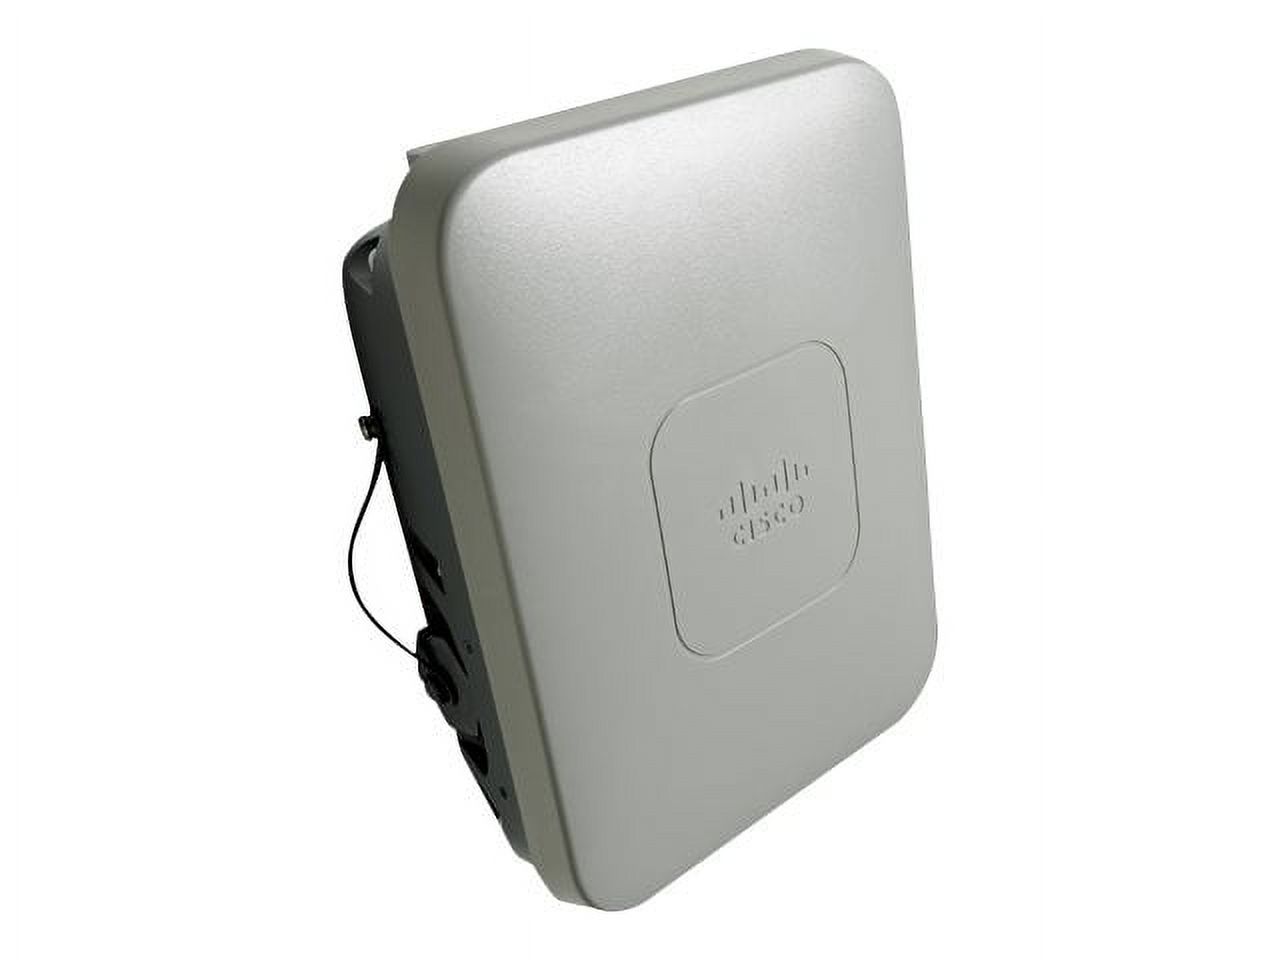 Cisco Aironet 1532I - Wireless access point - Wi-Fi - 2.4 GHz, 5 GHz - image 1 of 2